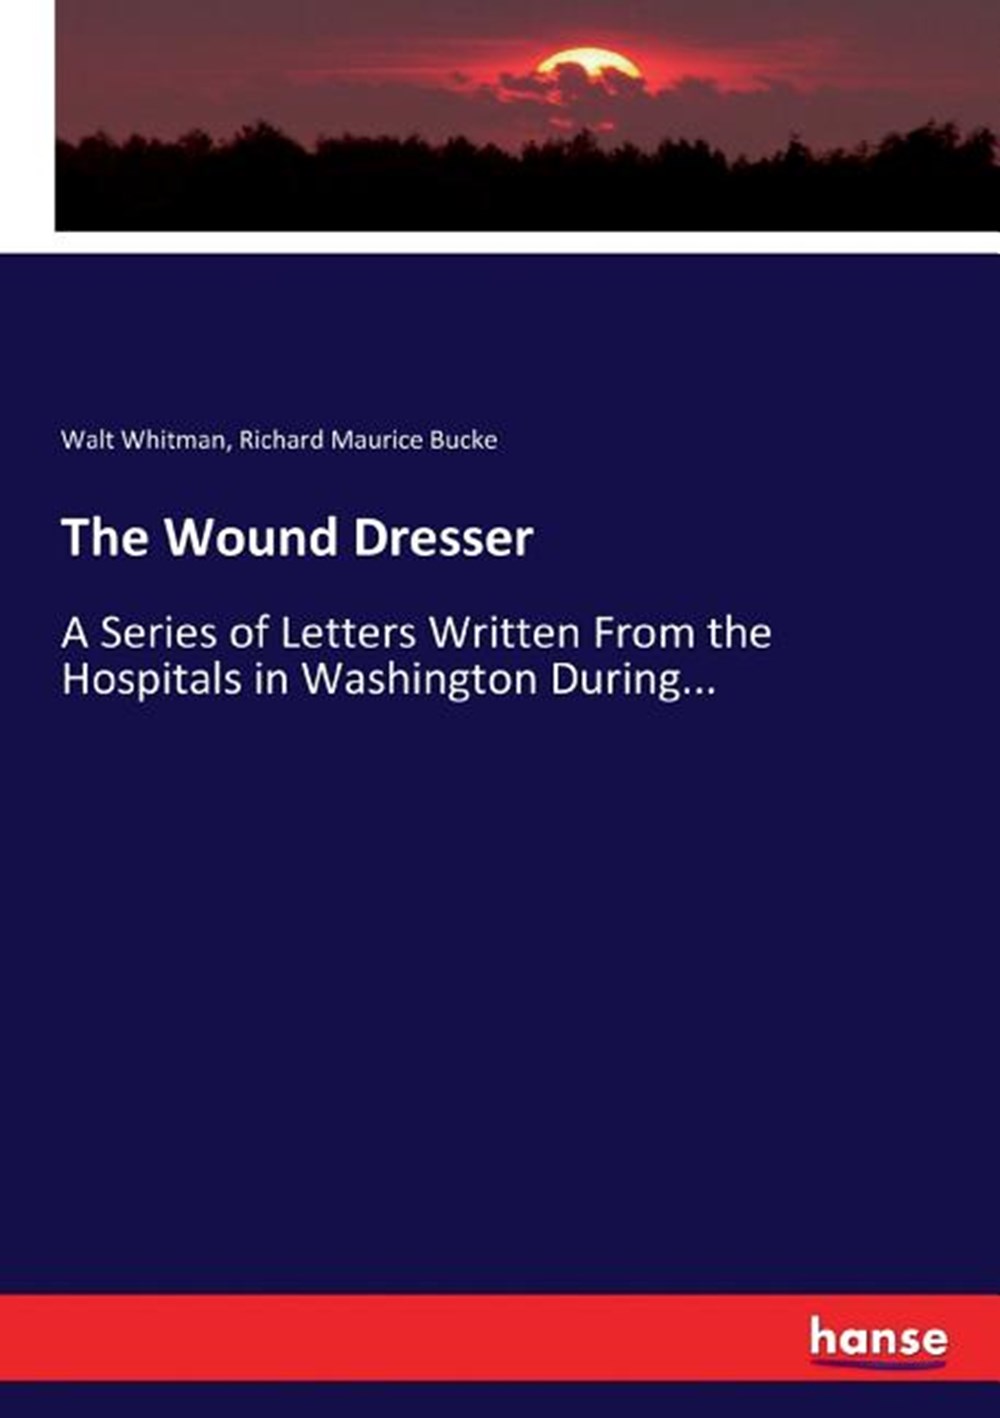 Wound Dresser: A Series of Letters Written From the Hospitals in Washington During...